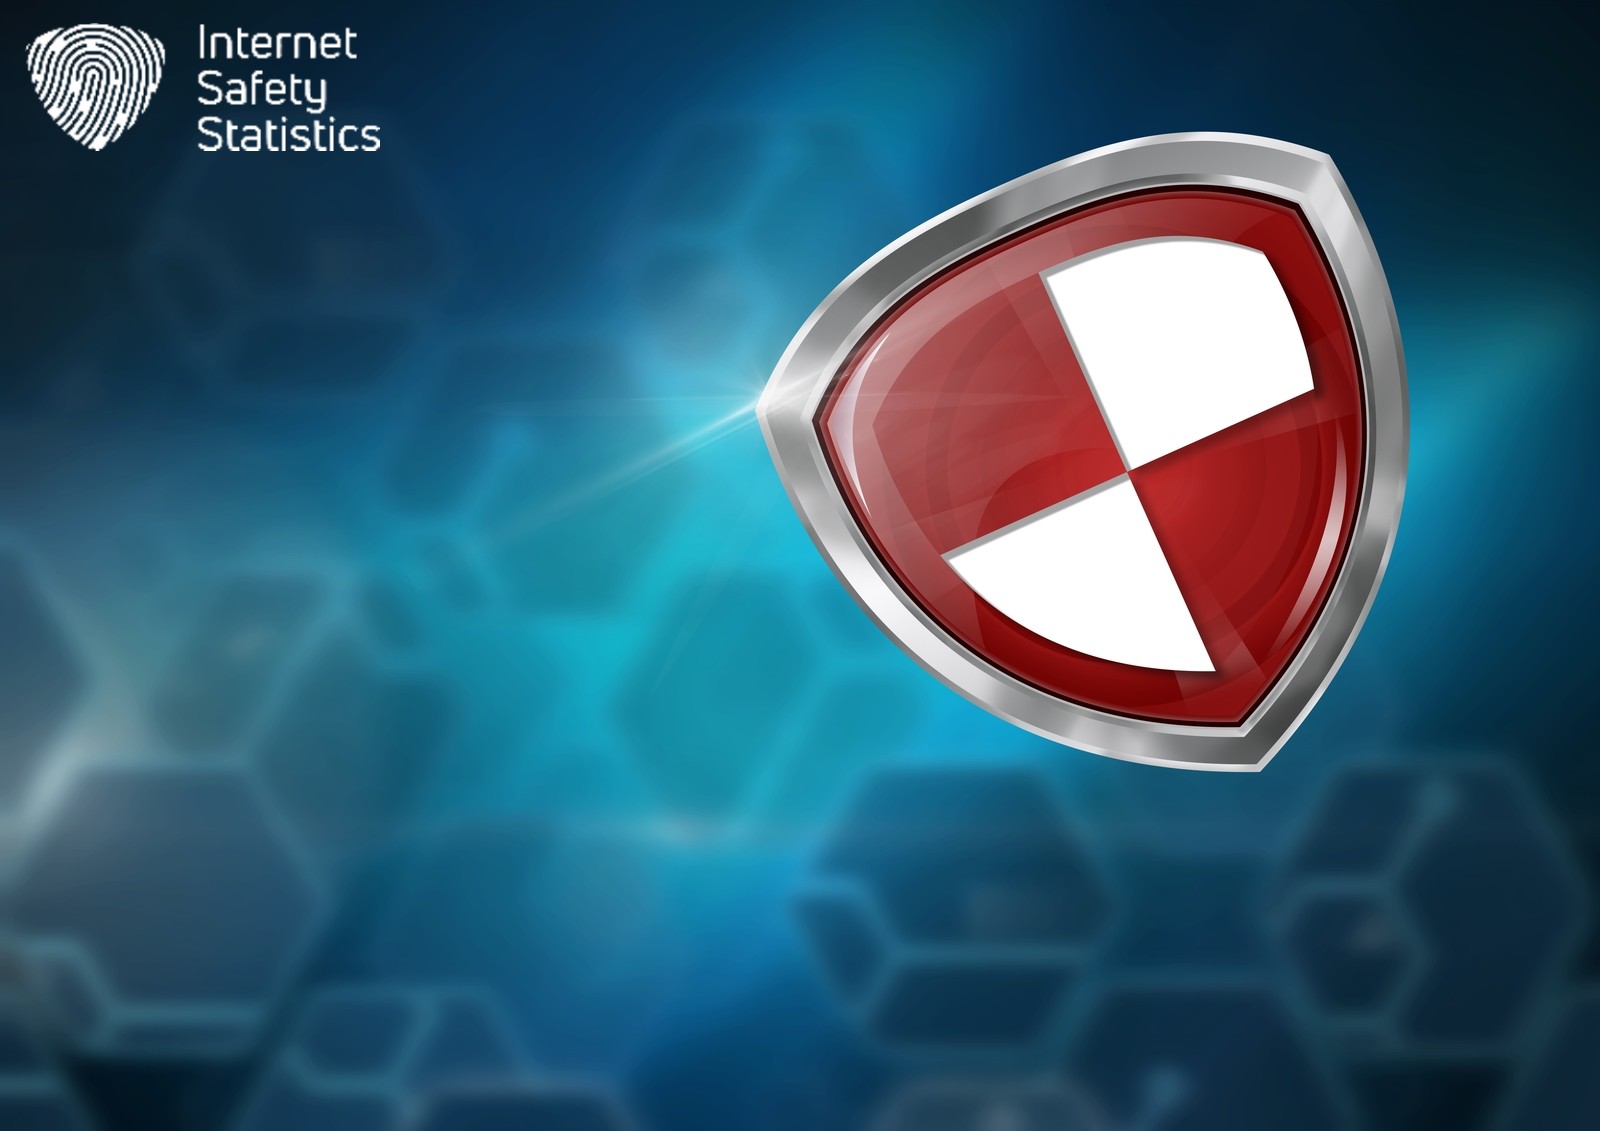 Bitdefender vs ESET - The choice between the two depends on your preferences and device